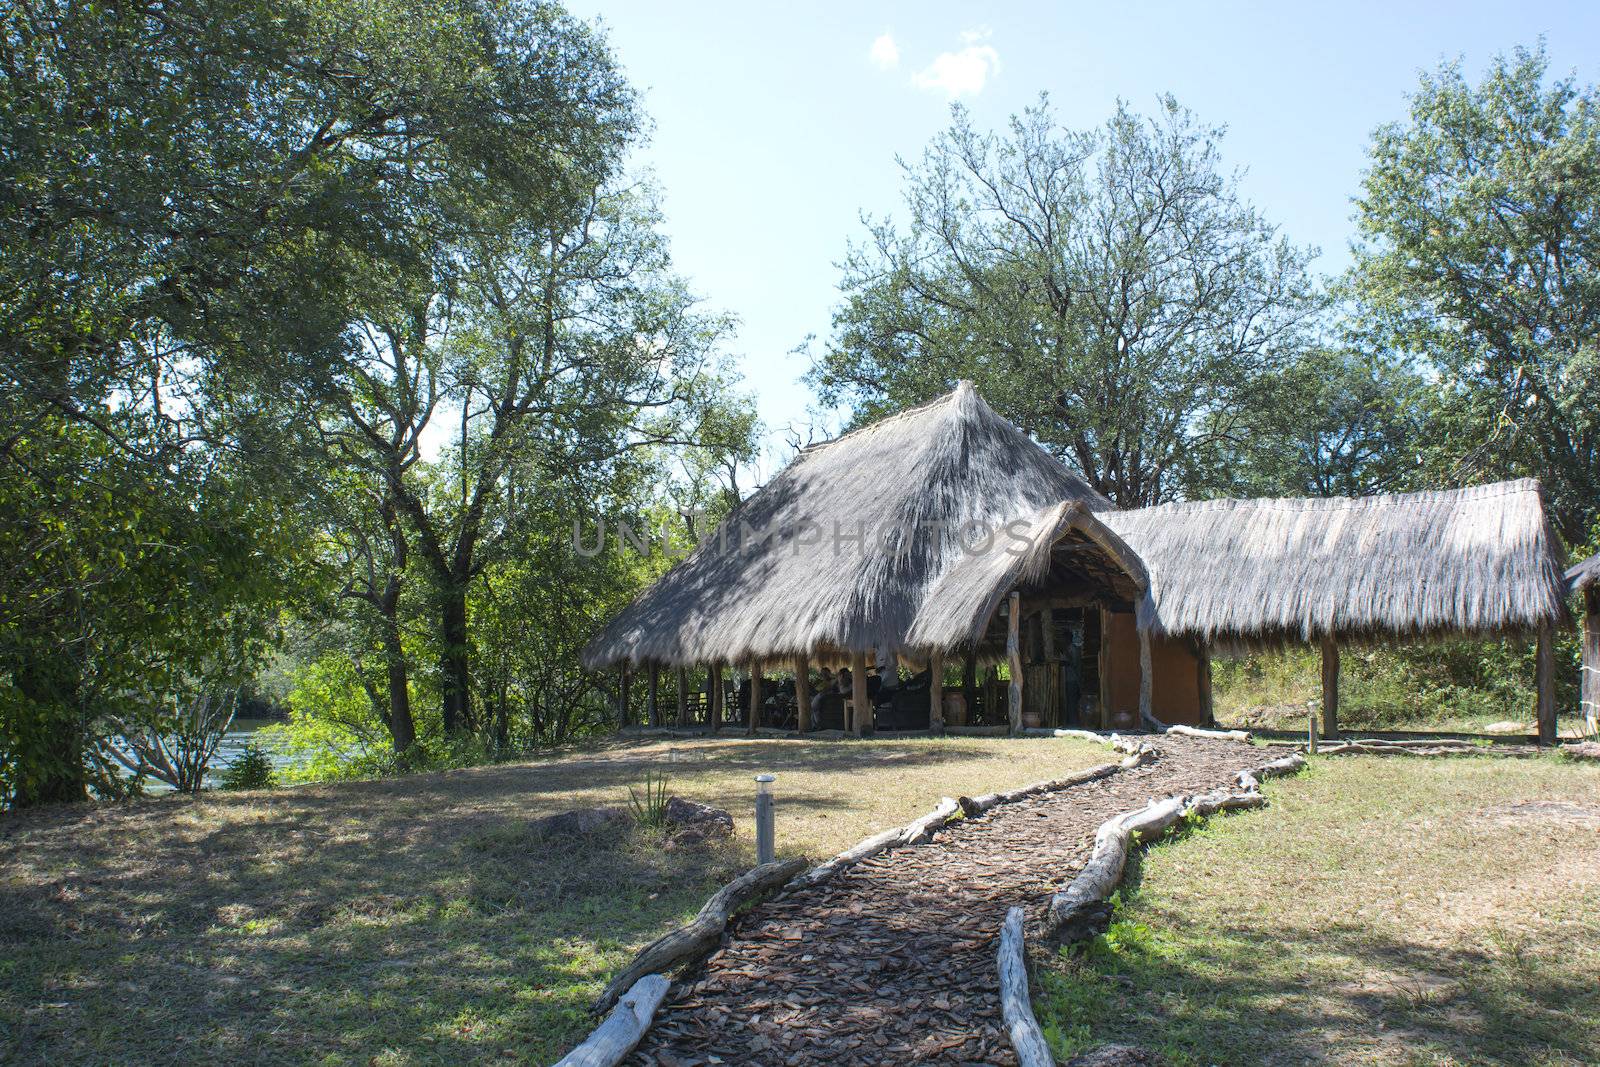 typical construction in the African savannah